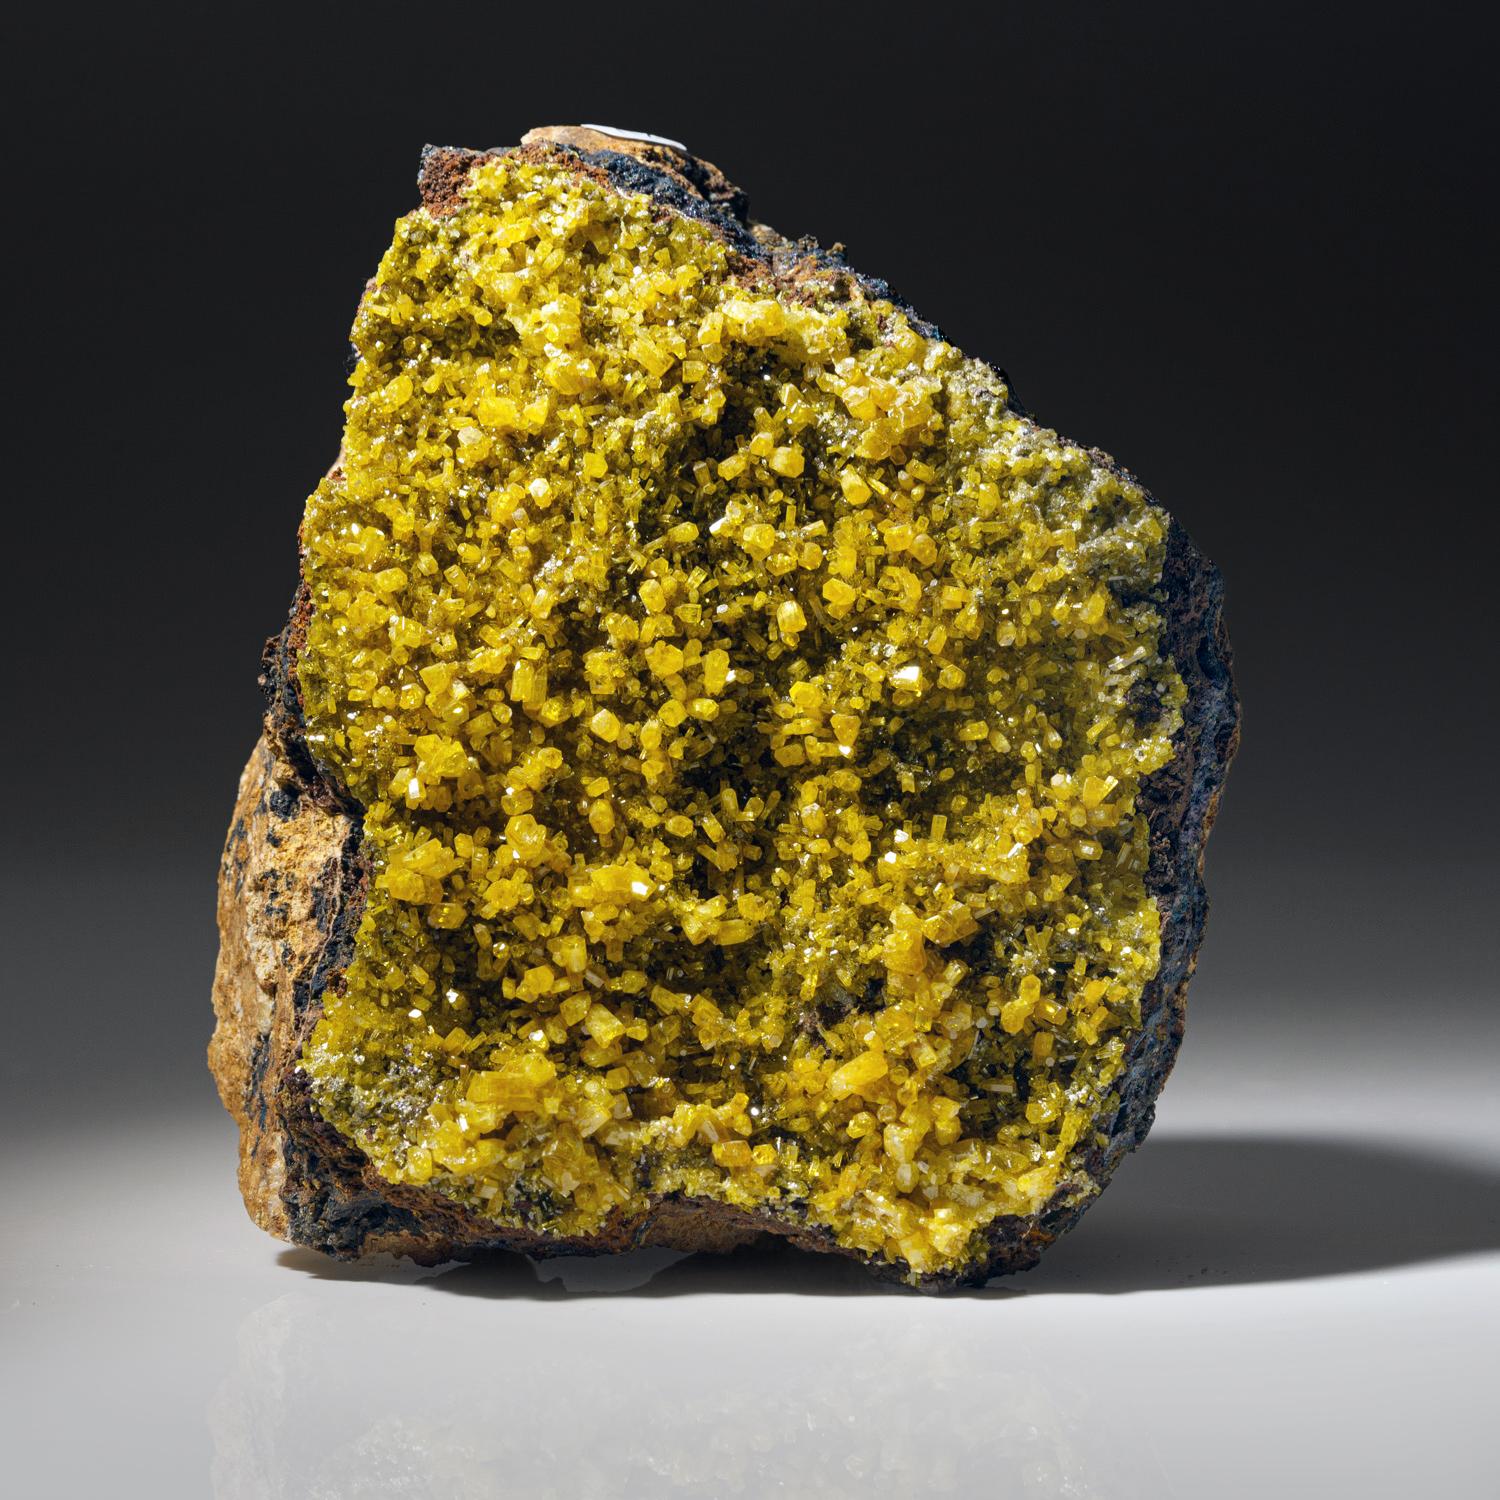 Mimetite from San Pedro Mine, San Pedro Corralitos, Chihuahua, Mexico

Well defined undamaged specimen of olive yellow-green ball aggregates of mimetite crystals covering on limonite gossan matrix. All crystals completely intact and undamaged with